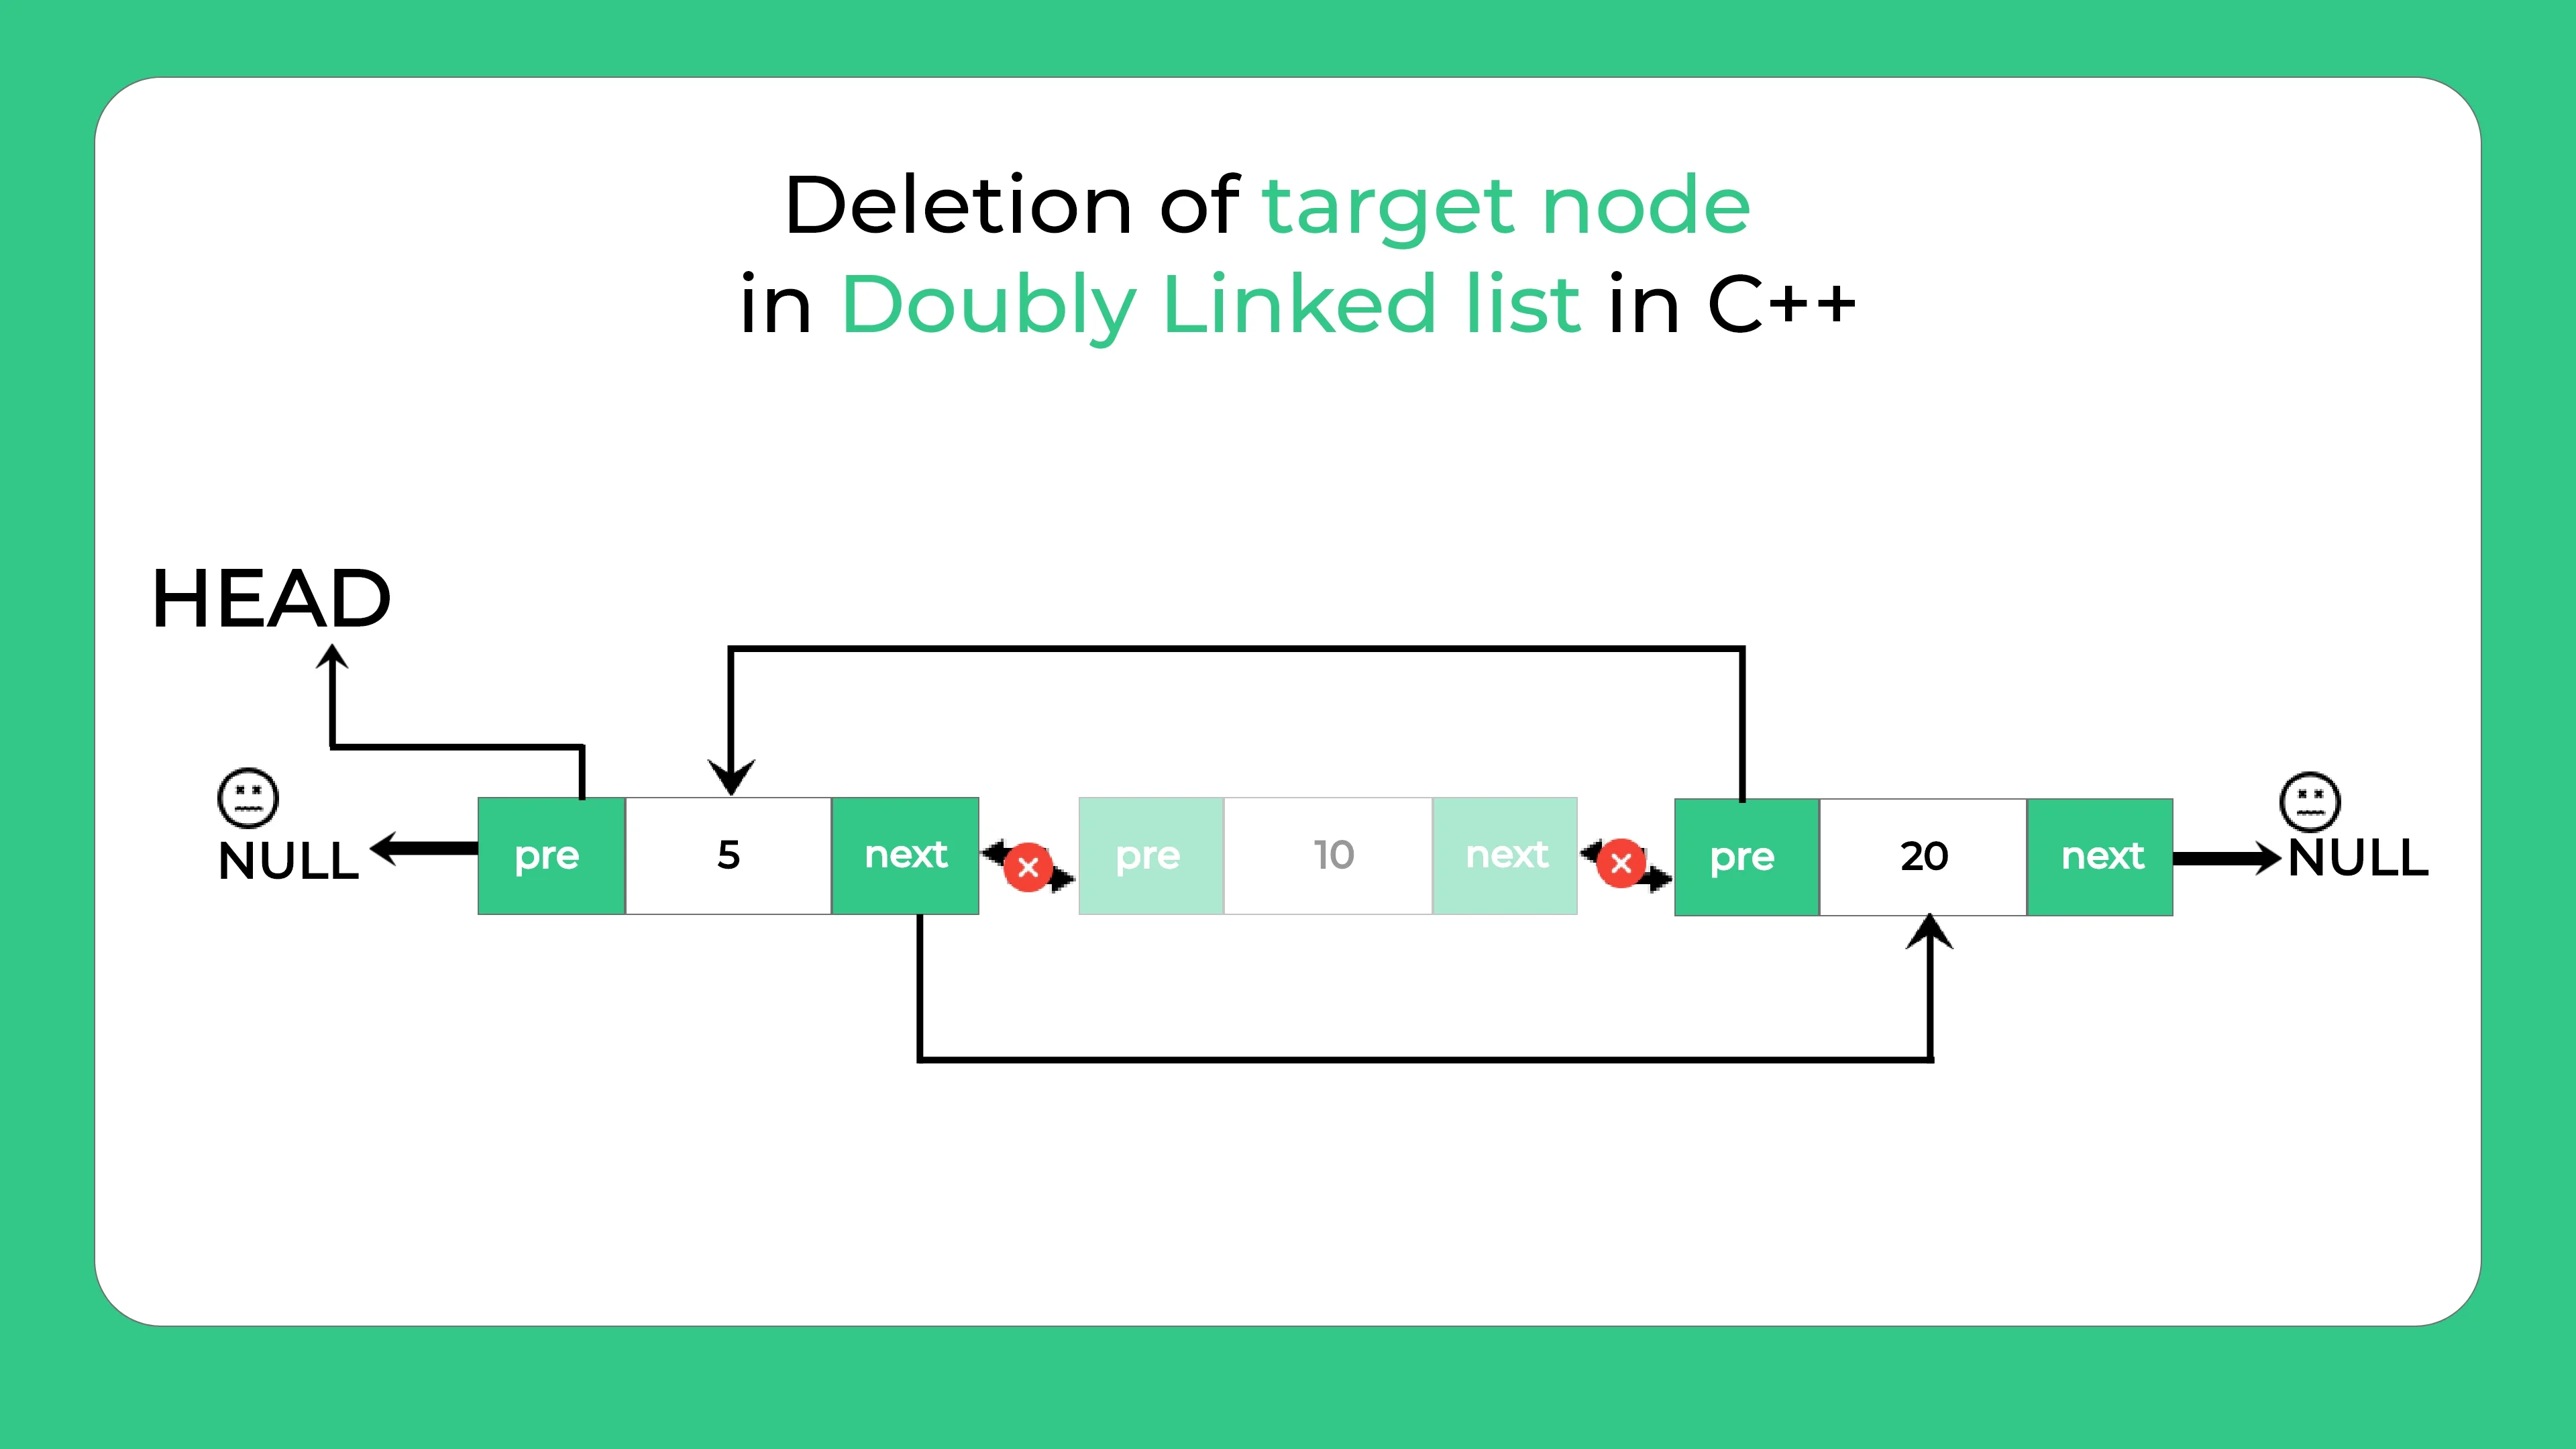 Deletion of target node in doubly linked it in C++